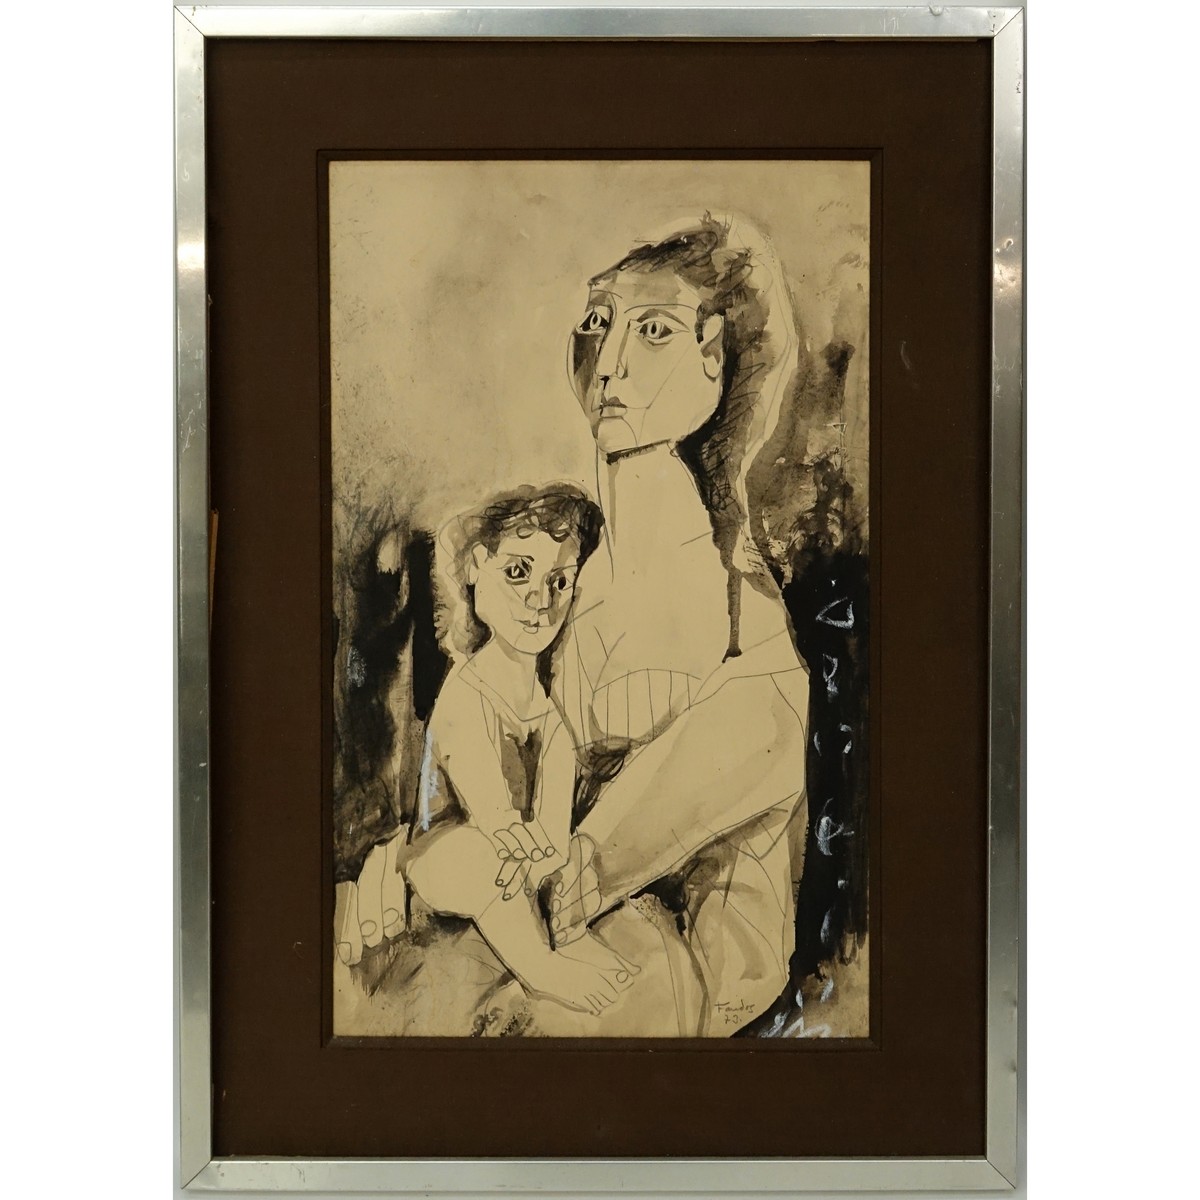 20th Century Gouache on Paper, Portrait of a Mother and Child, Signed Foudos? Lower Right. Some water spots to paper.